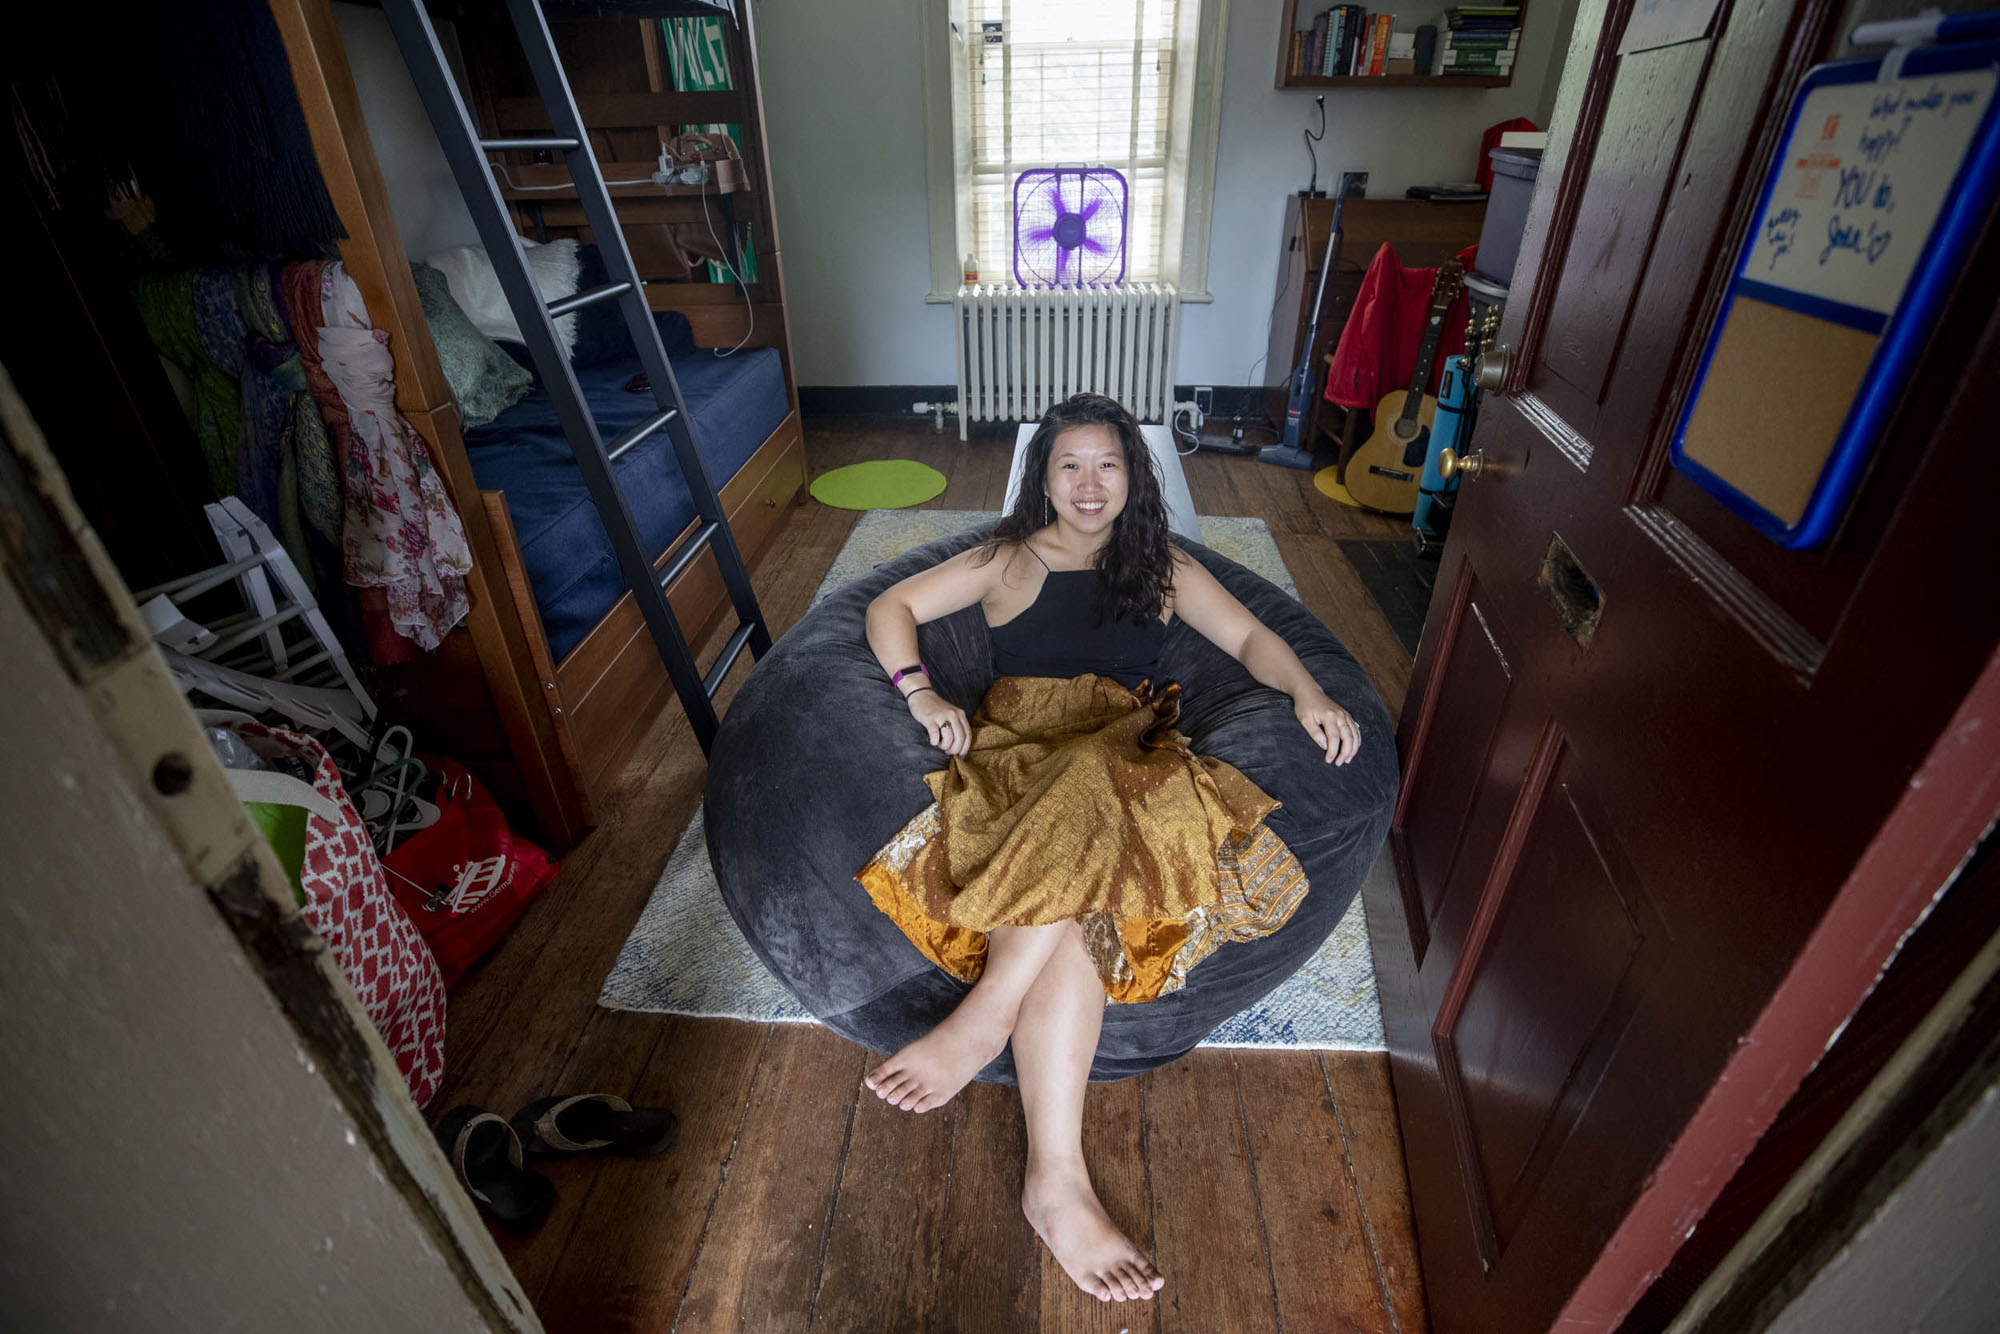 Joan lee sits in a bean bag chair in the middle of her lawn Room